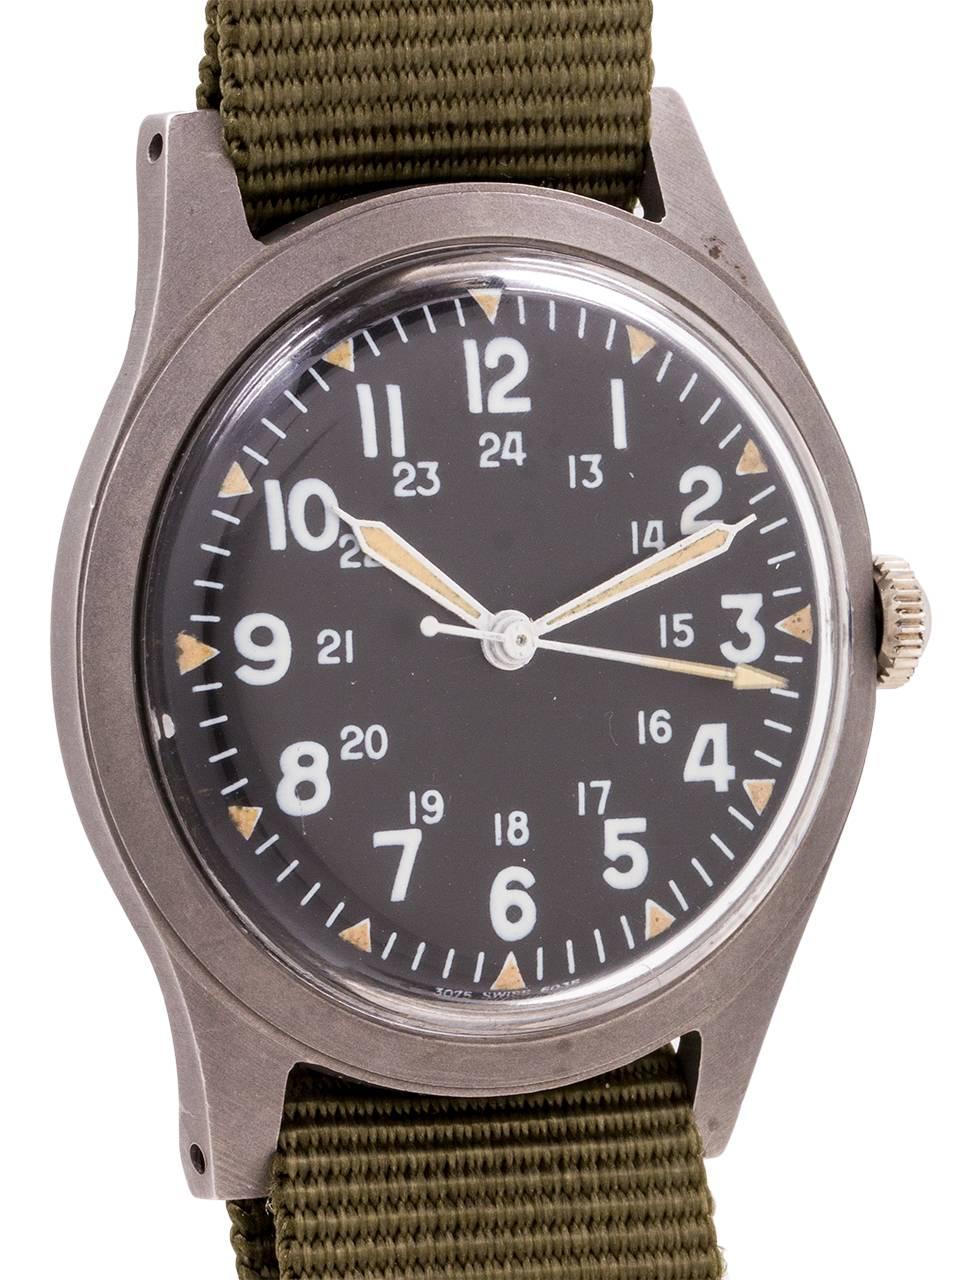 
US Military issue Benrus man’s wristwatch post Vietnam era featuring 34 X 41mm non reflective brushed finish base metal case, acrylic crystal, and original matte black dial with 24 hour indexes and triangular luminous hour indexes, luminous hands